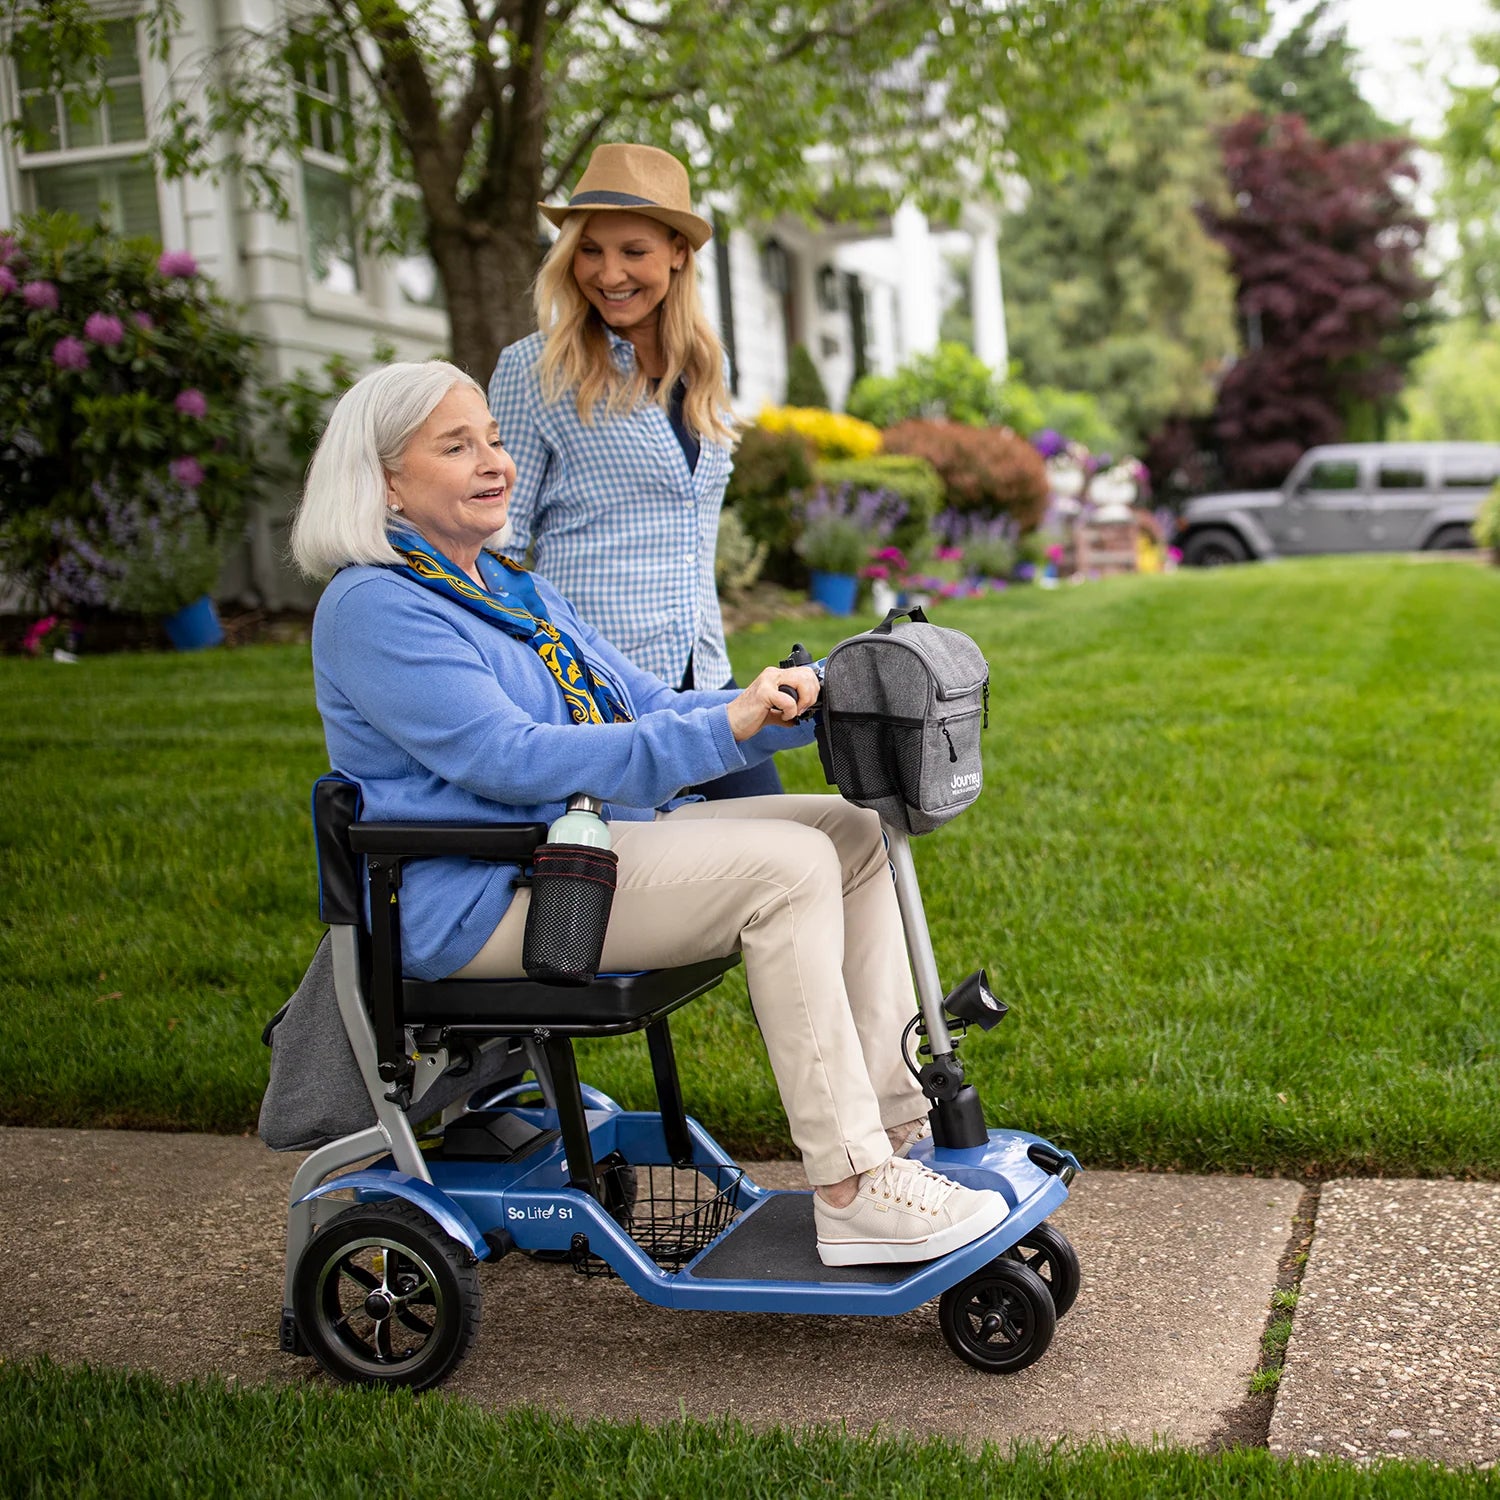 Senior driving the Journey So Lite Lightweight Folding Power Scooter while talking to granddaughter